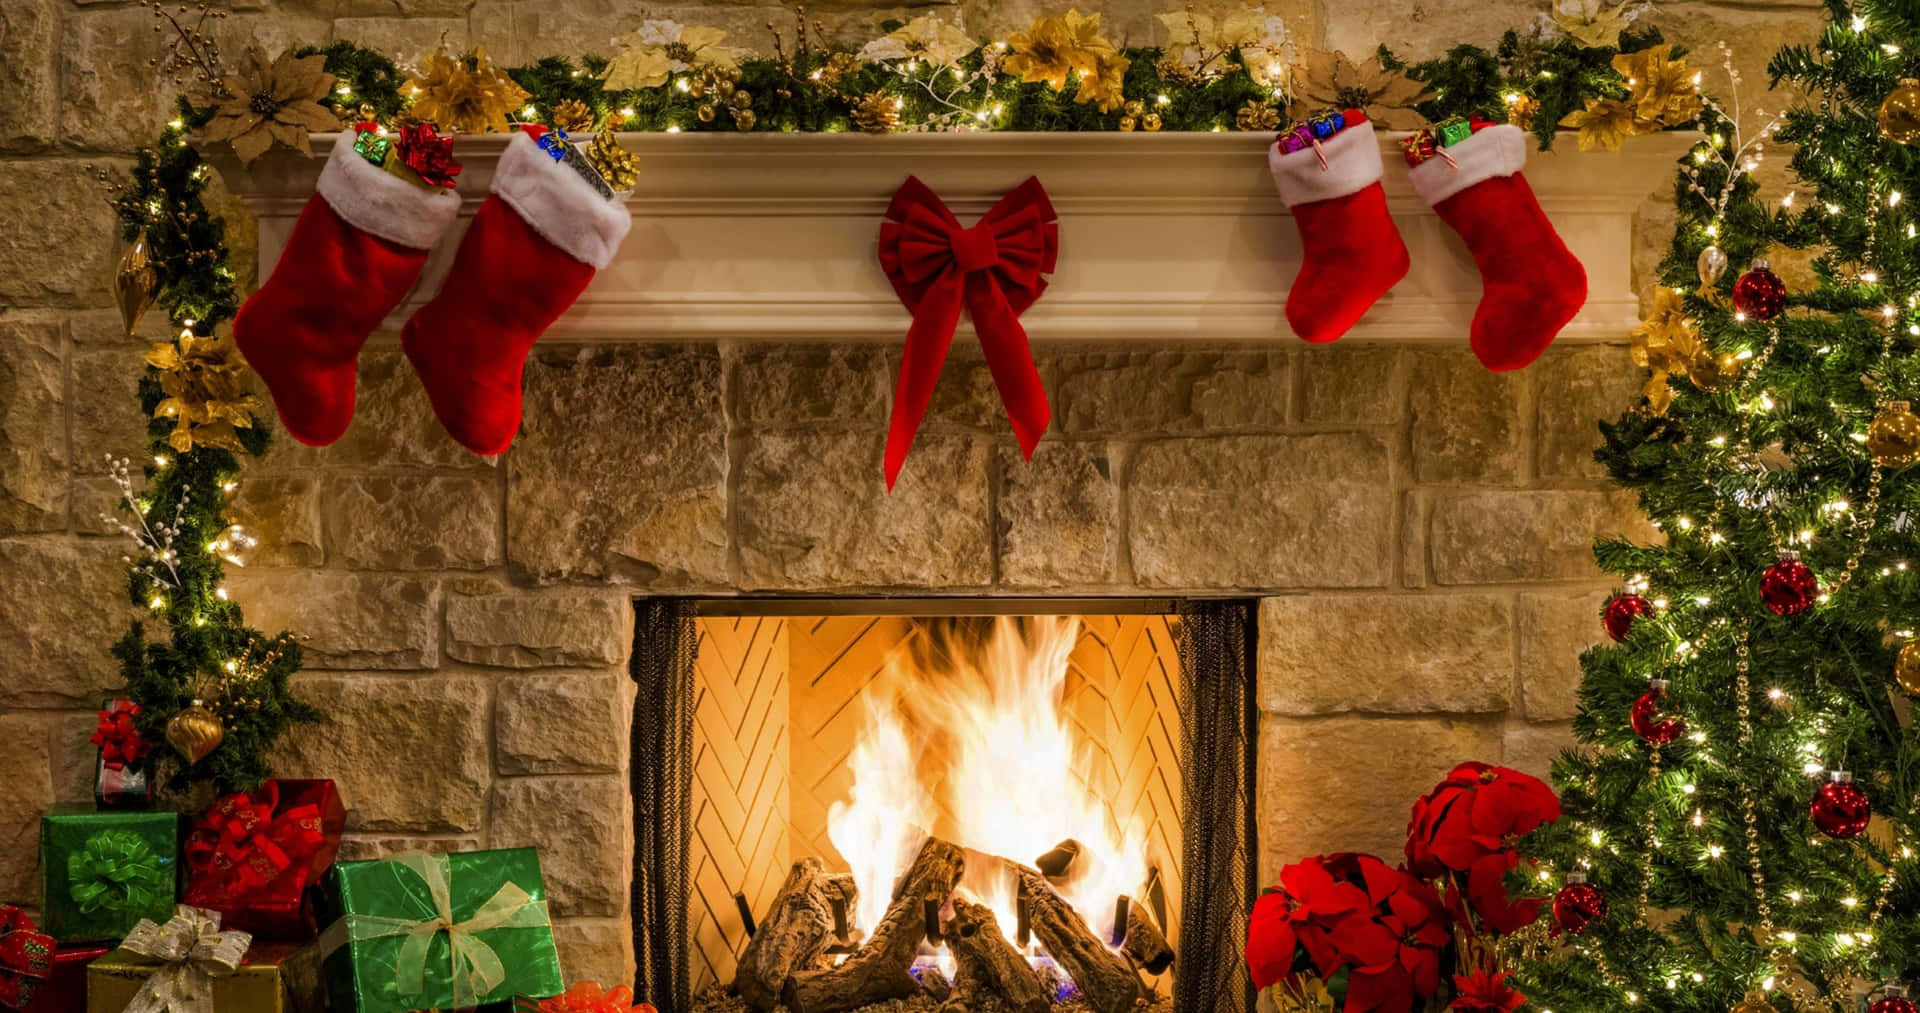 Fireplace Zoom Background Red Socks